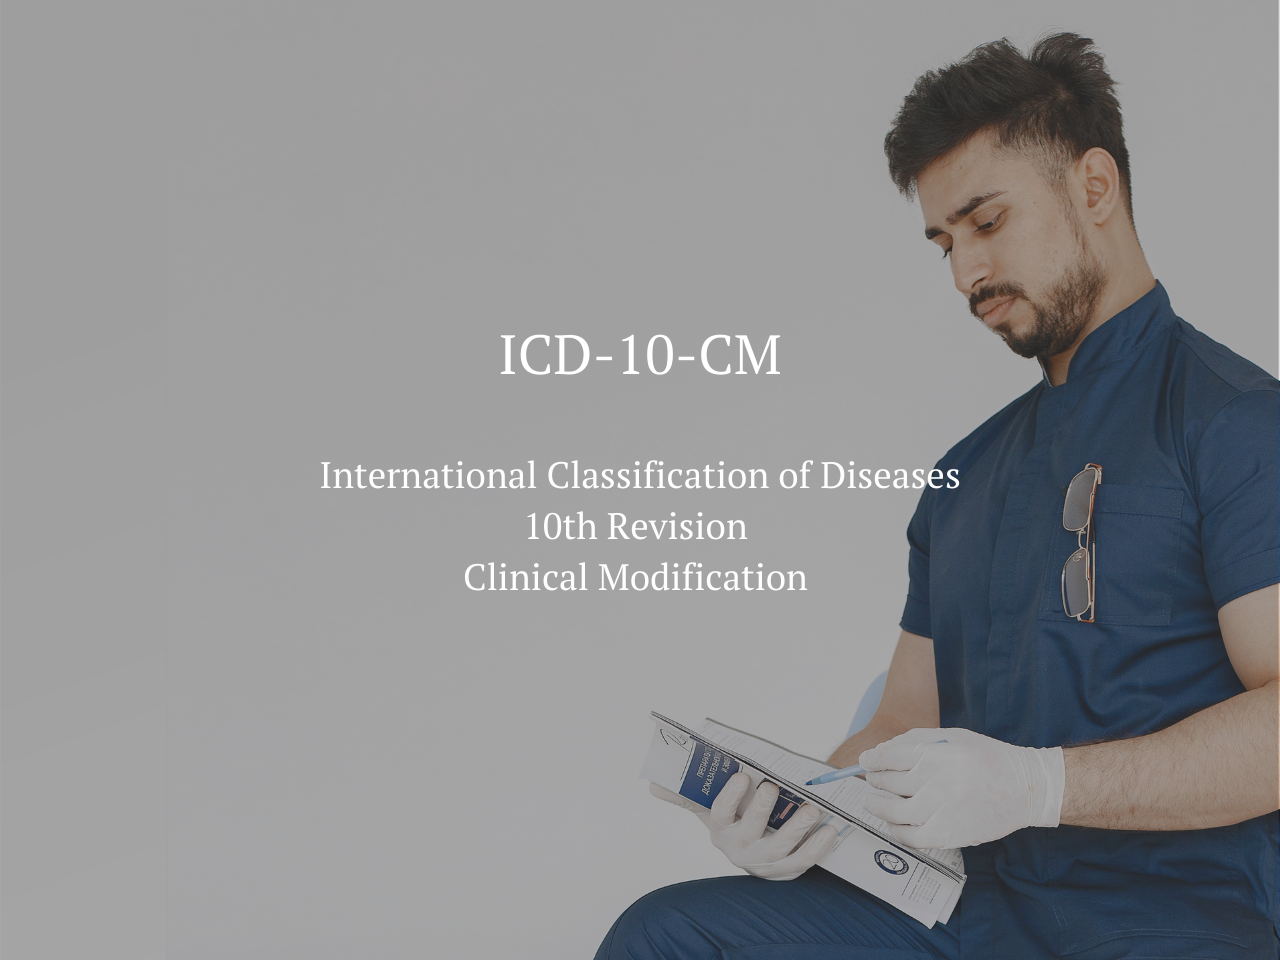 ICD-10-CM Applying Diagnostic Codes to the Dental Claim